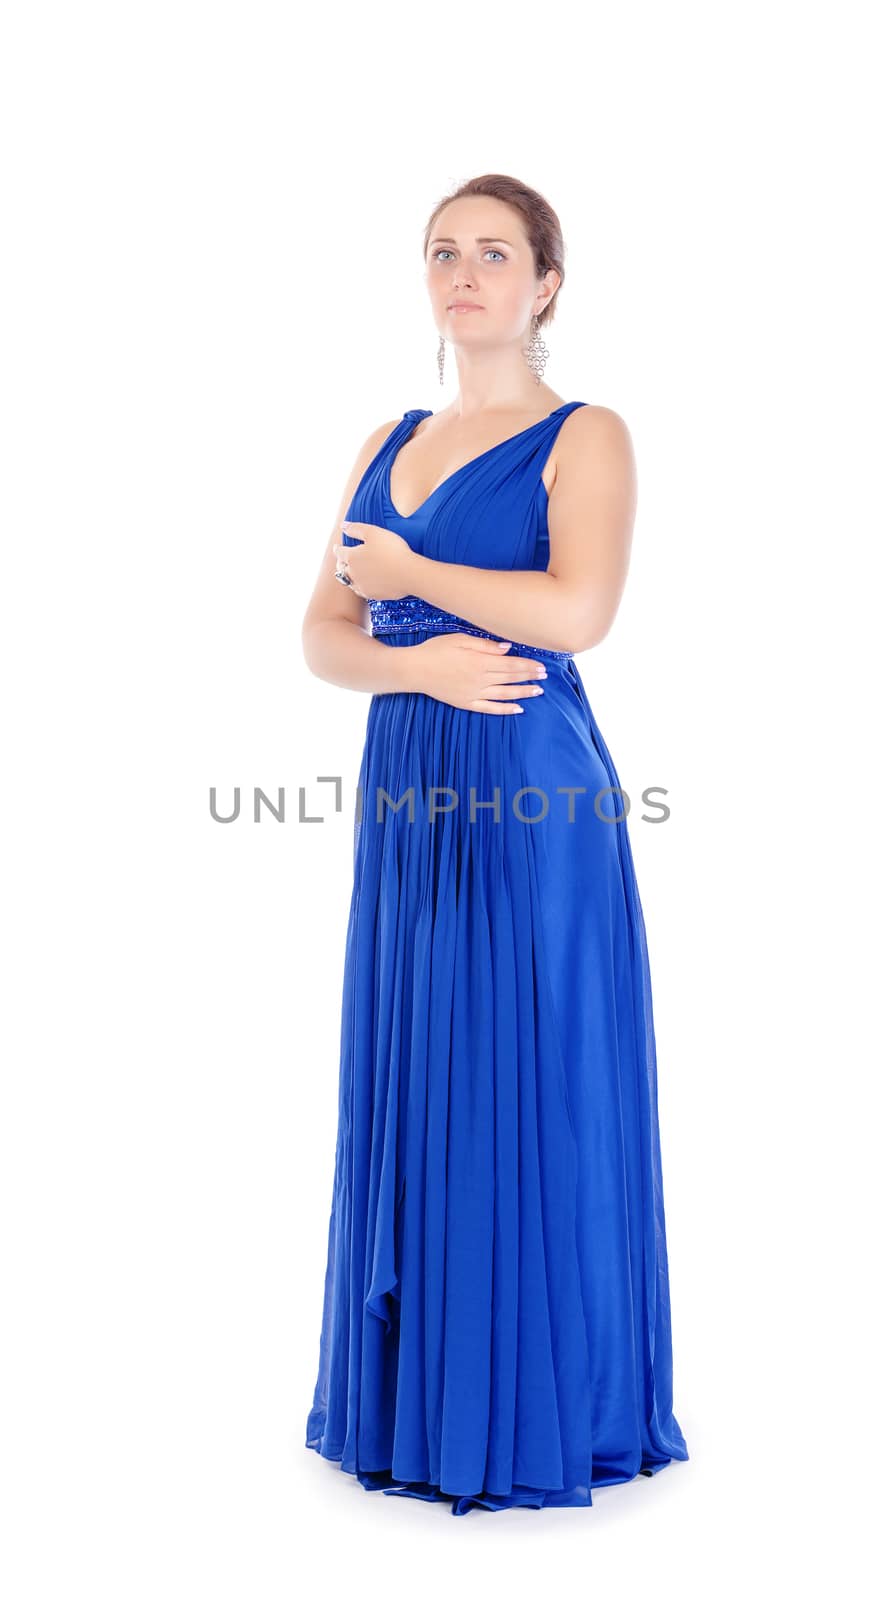 Full lenght portrait of a beautiful young woman in blue dress by Discovod